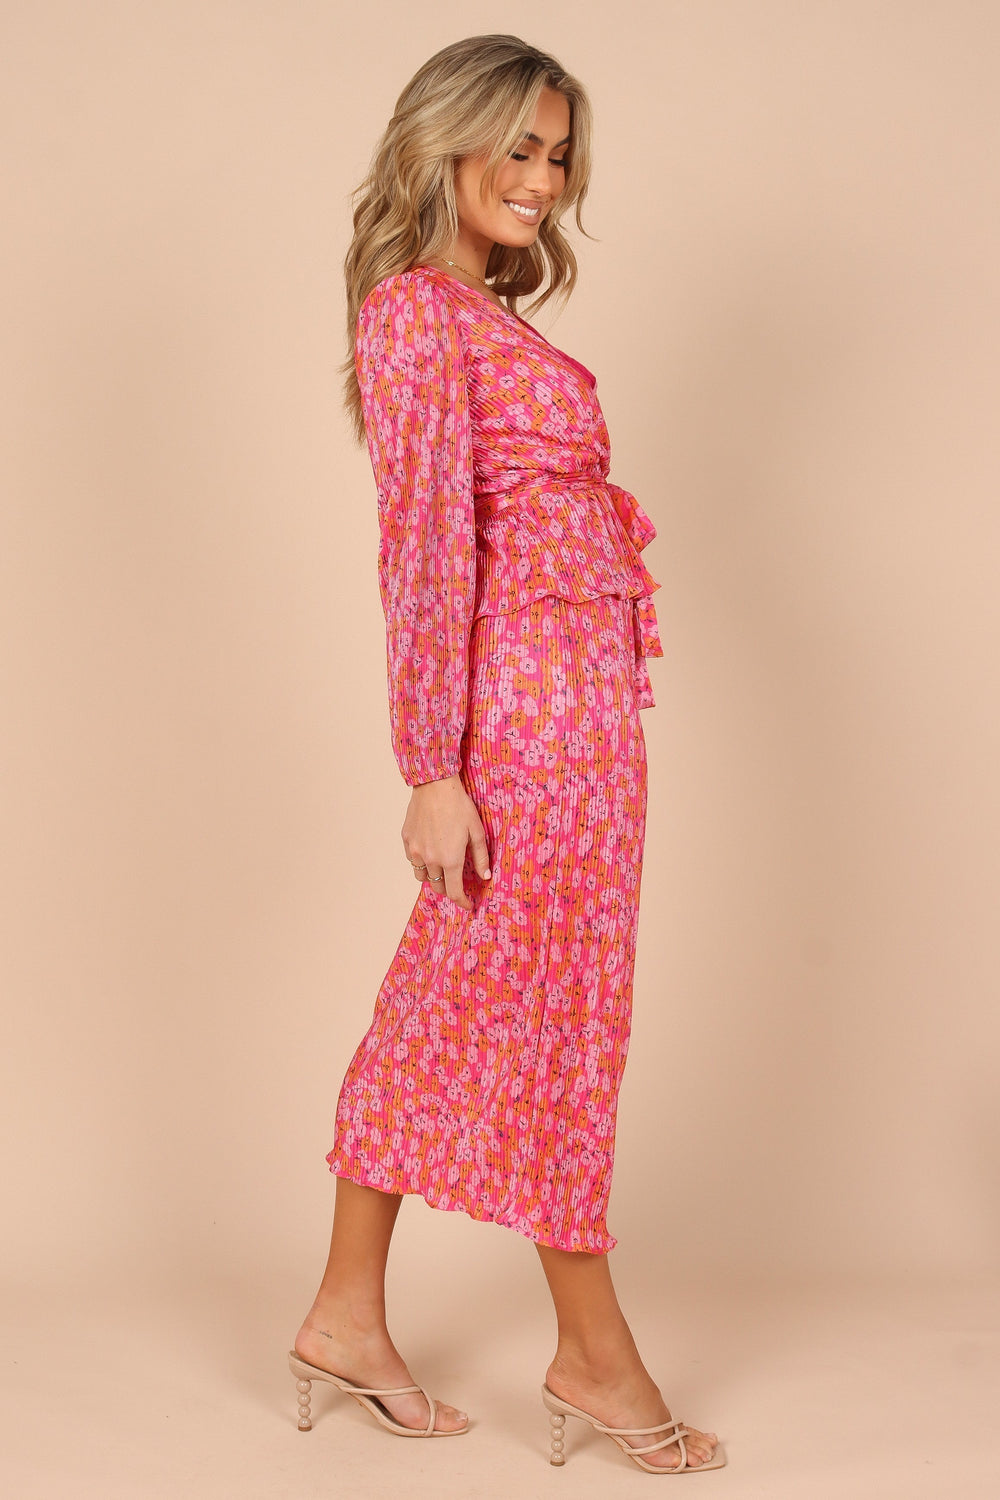 Petal and Pup USA TOPS Minelli Pleat Top - Hot Pink